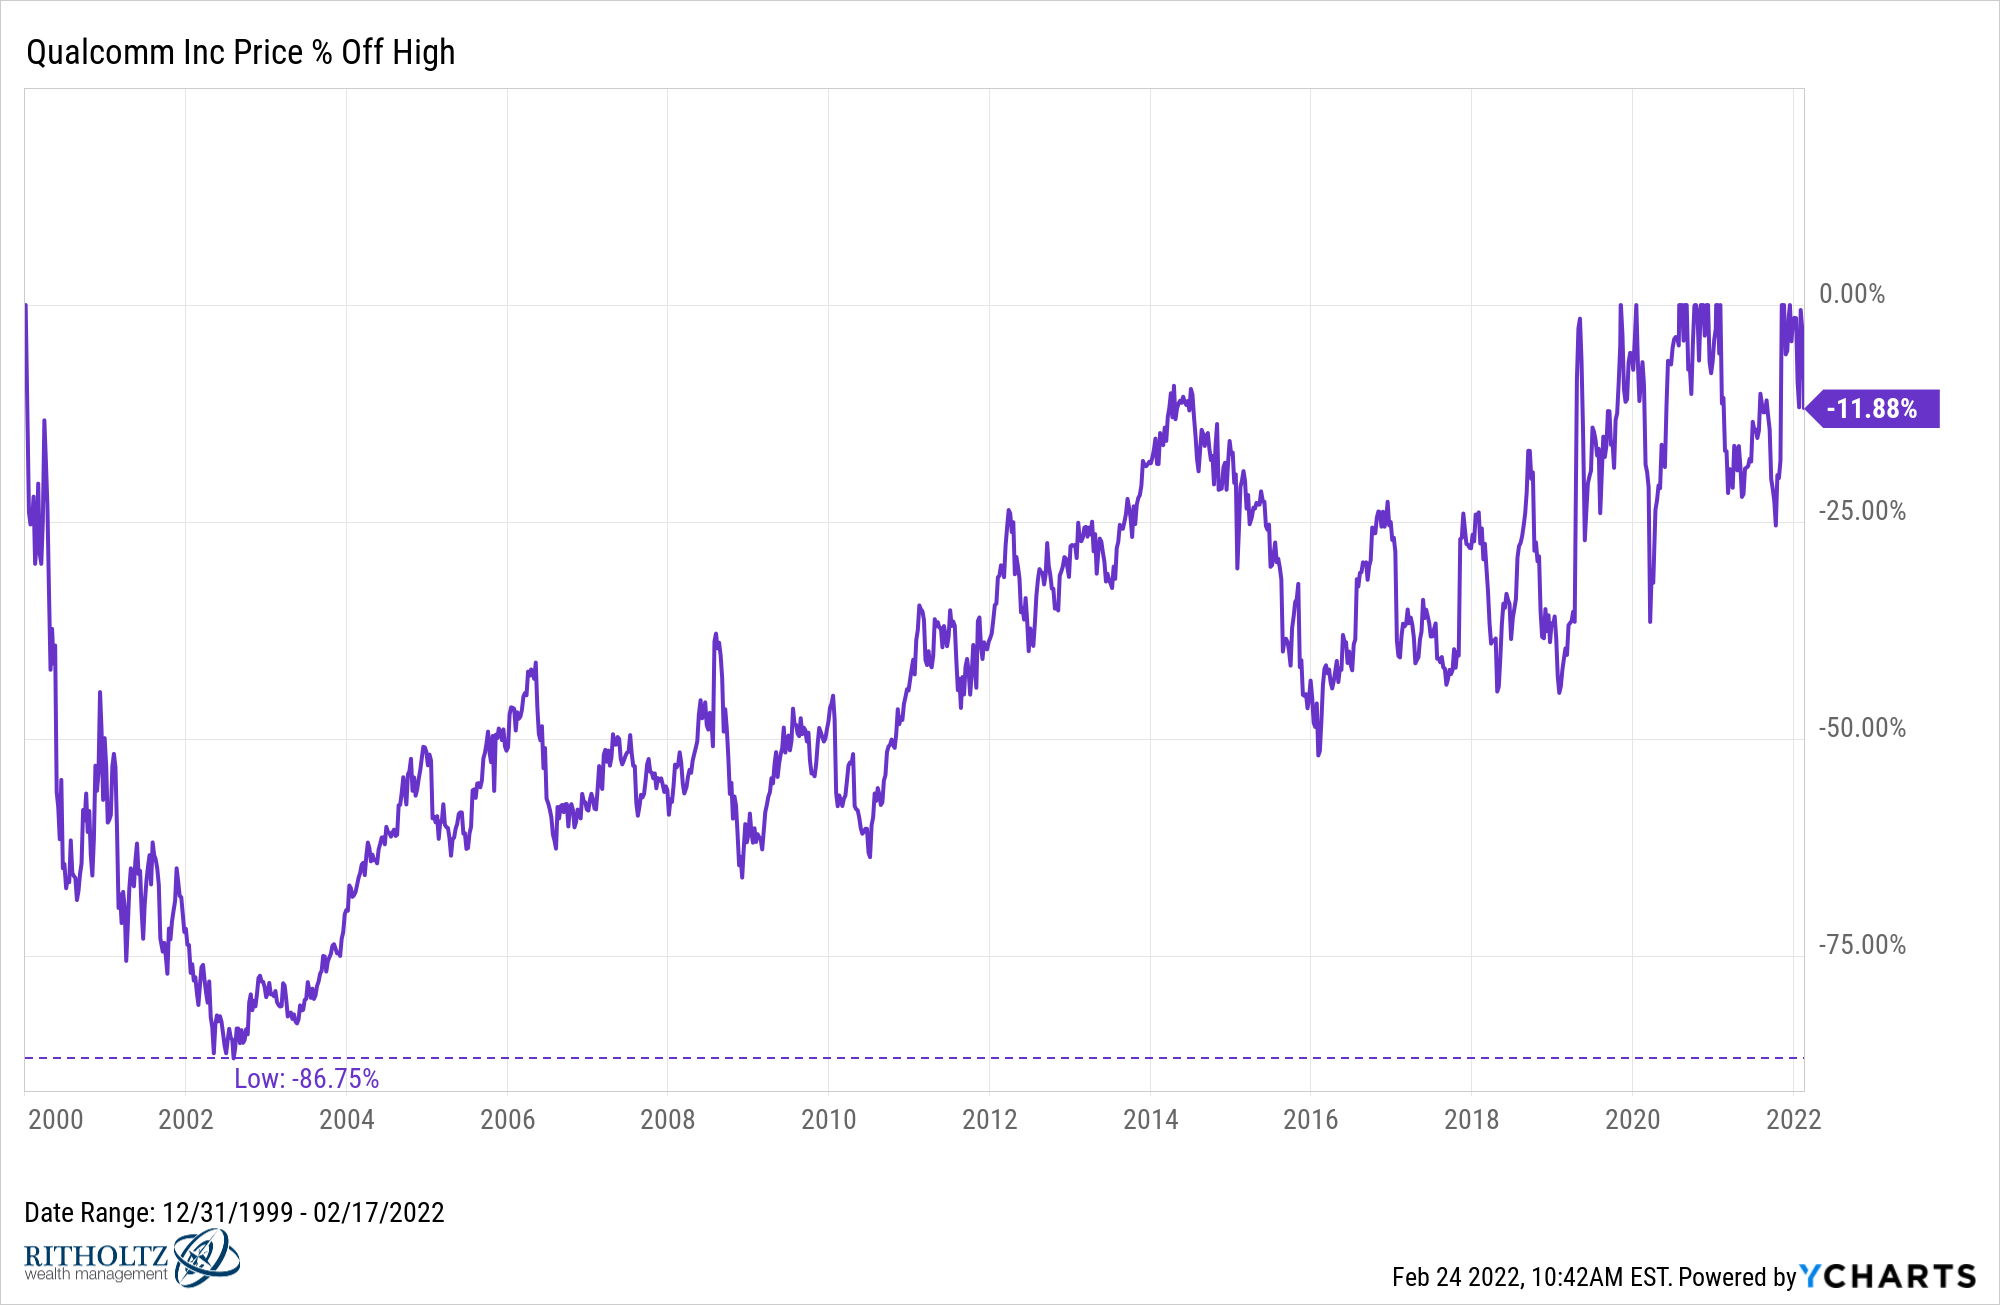 Qualcomm Price % Off High since 2000